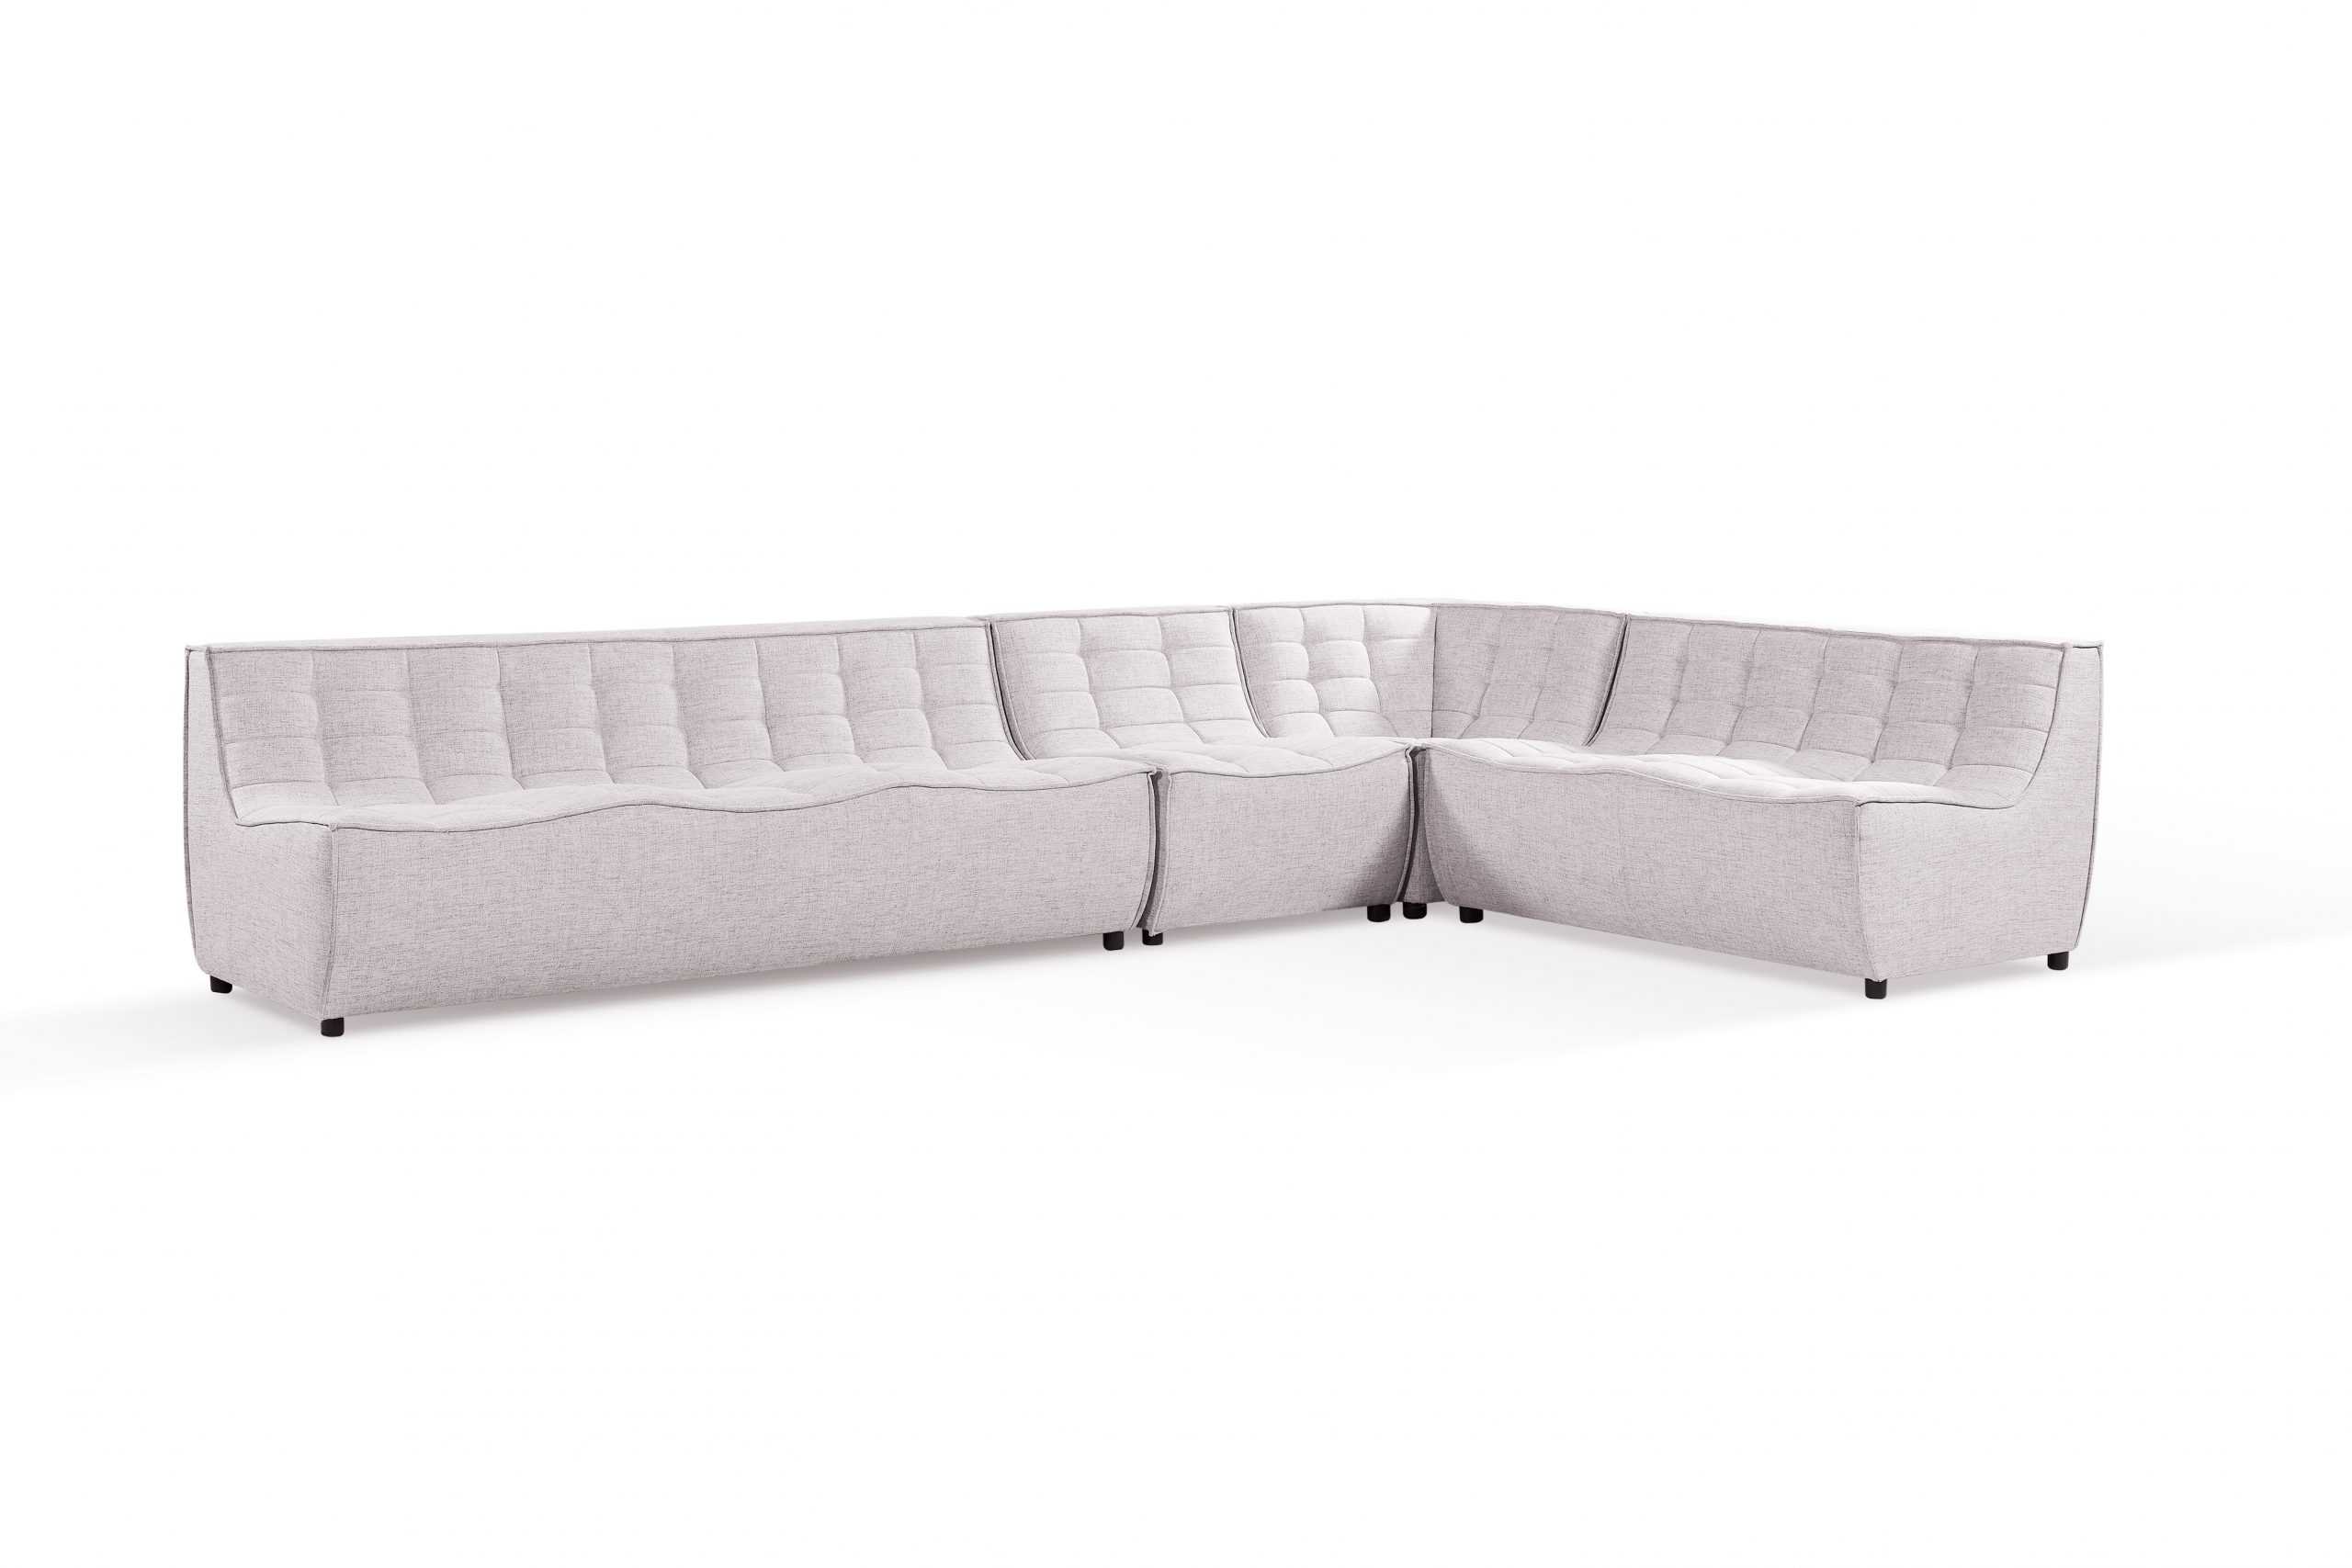 BT Domus Armless 1 Seater Sofa upholstered in Domus Fabric